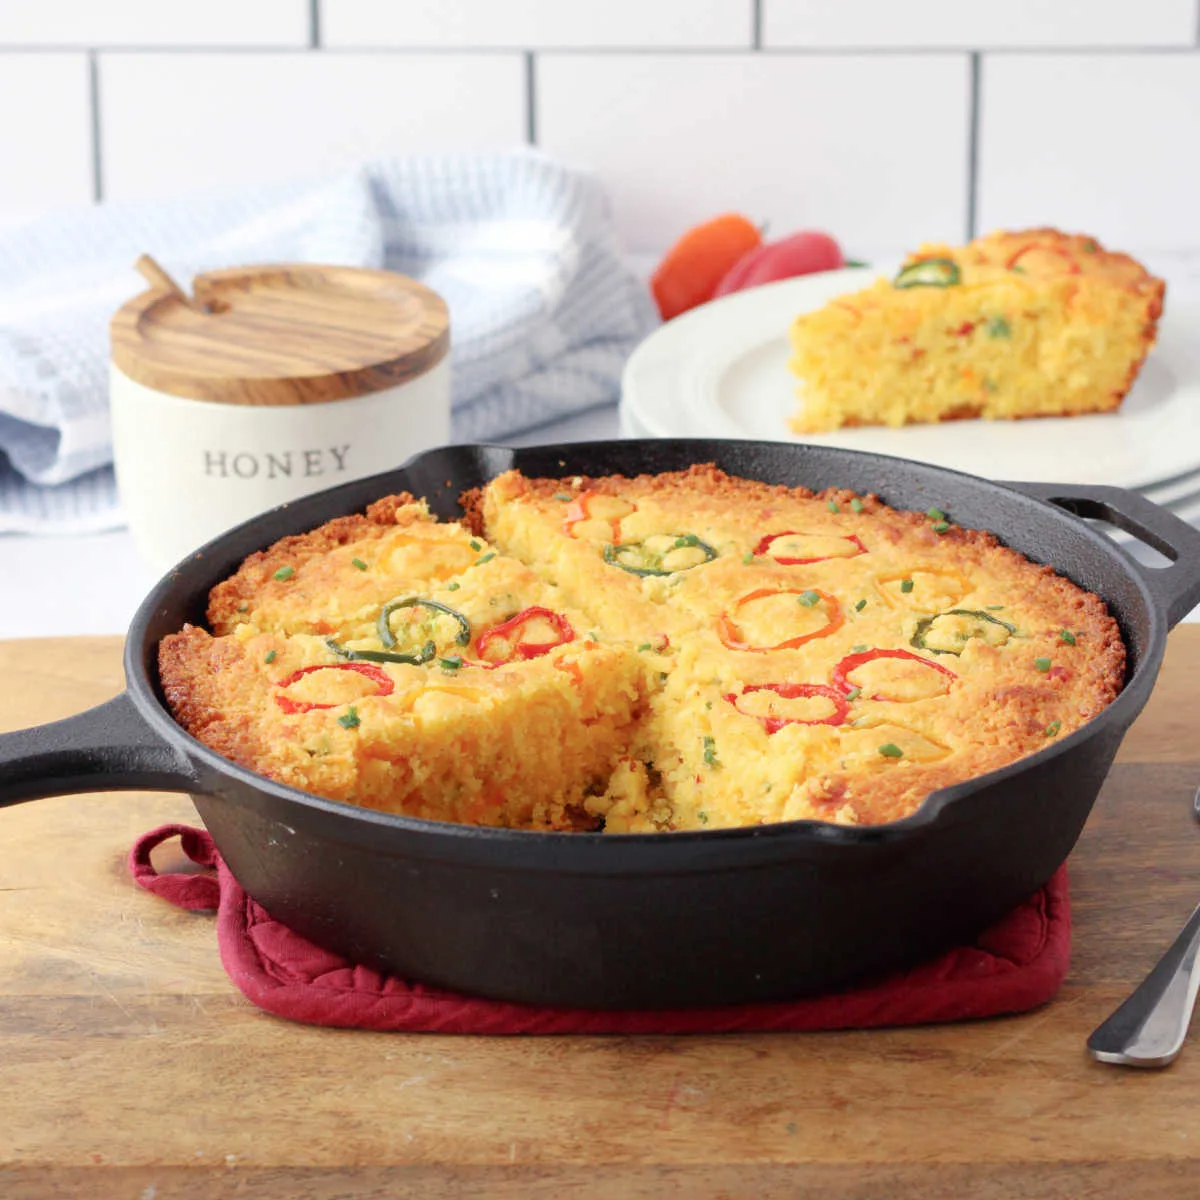 Skillet of loaded cornbread topped with pepper rings and filled with cheese, bacon, and jalapenos.